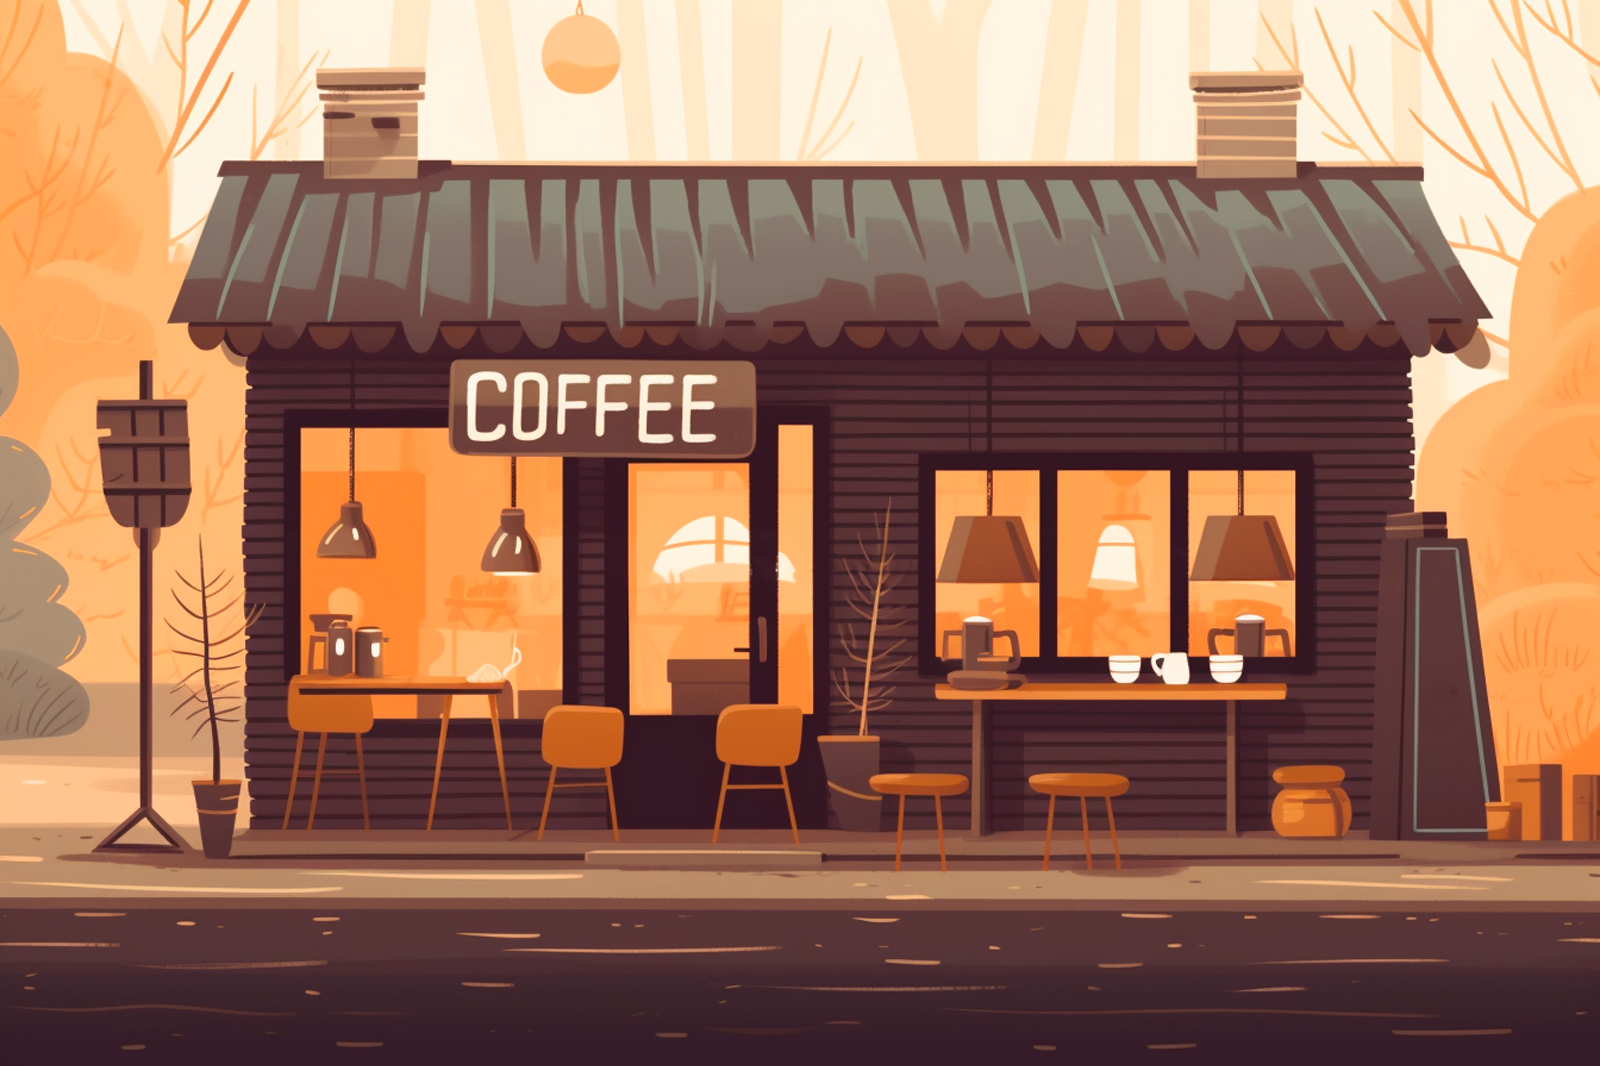 Fantasy coffee shop with outdoor seating, chairs, tables, and a delightful coffee cup and plate on a table